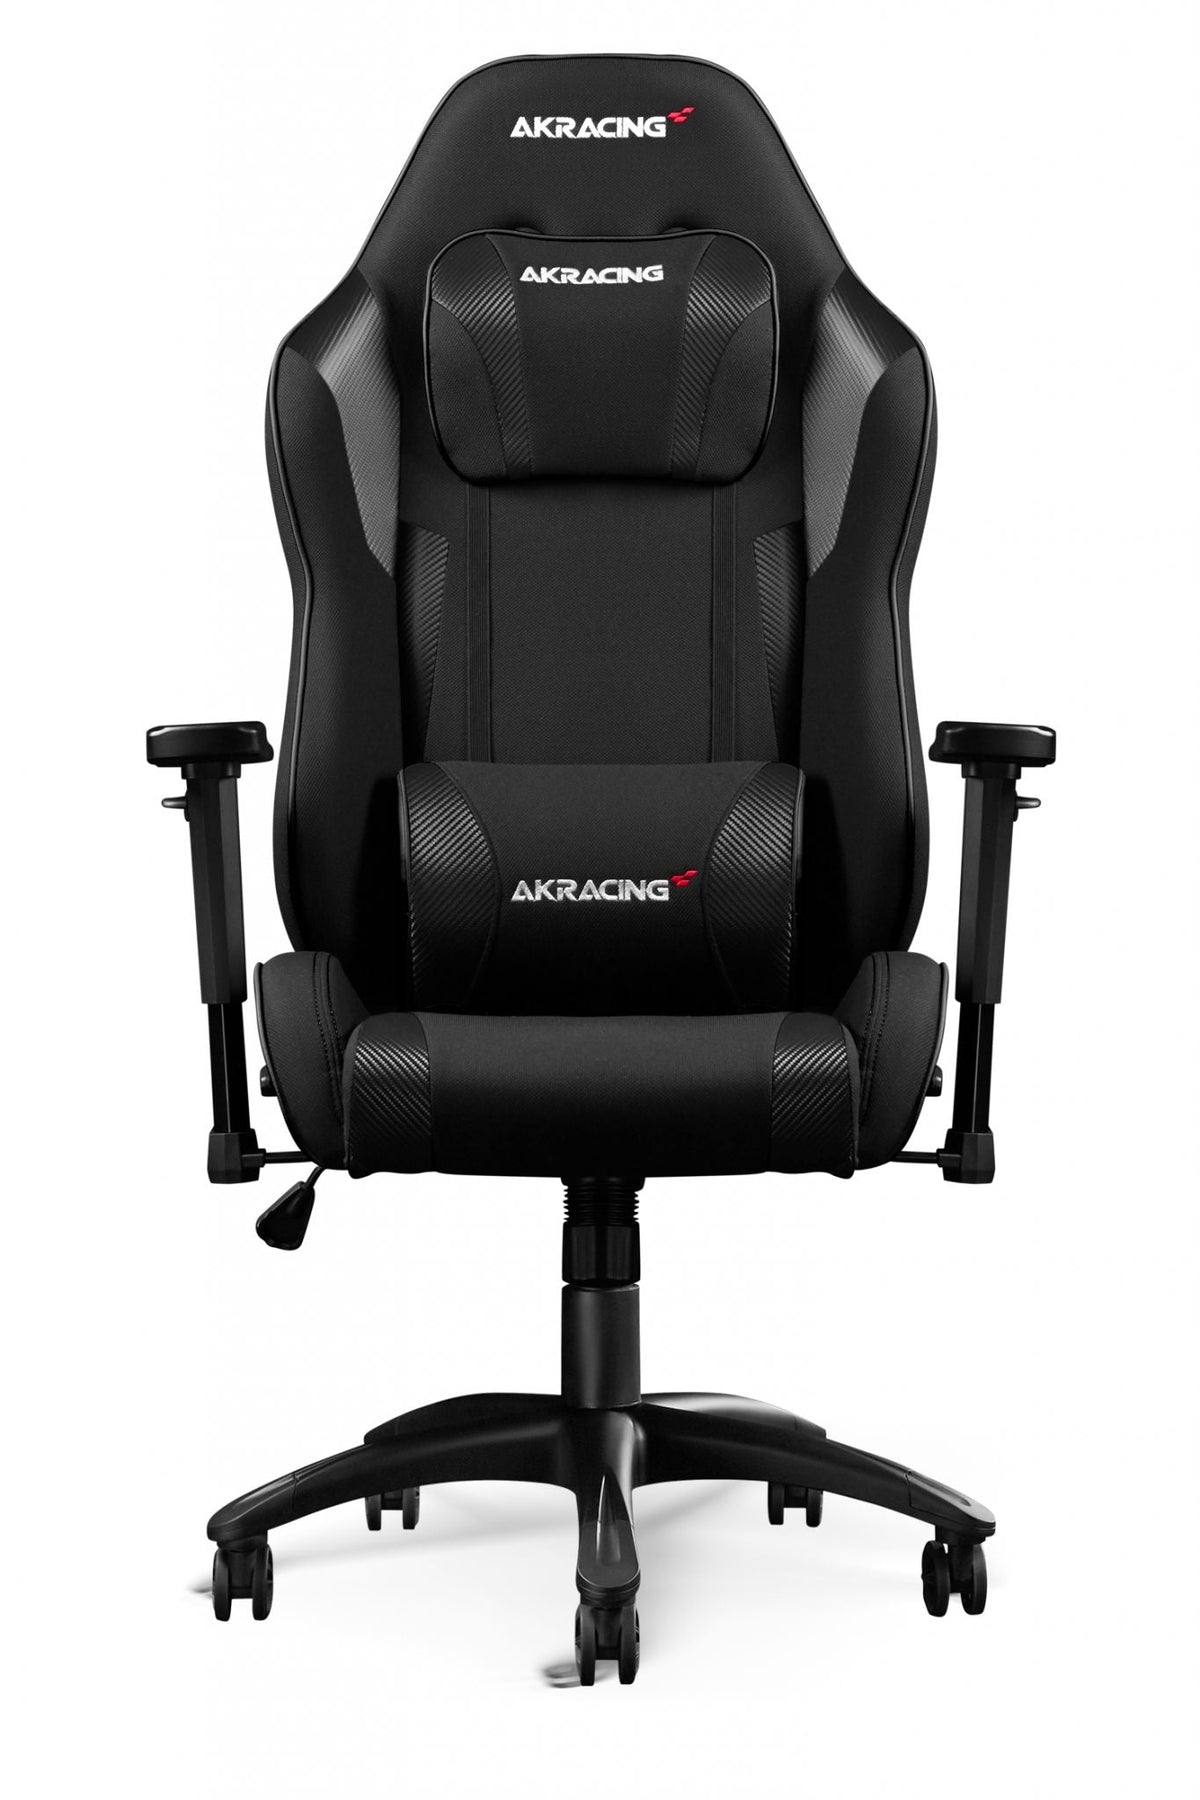 AKRacing EX PC gaming chair Upholstered padded seat Black